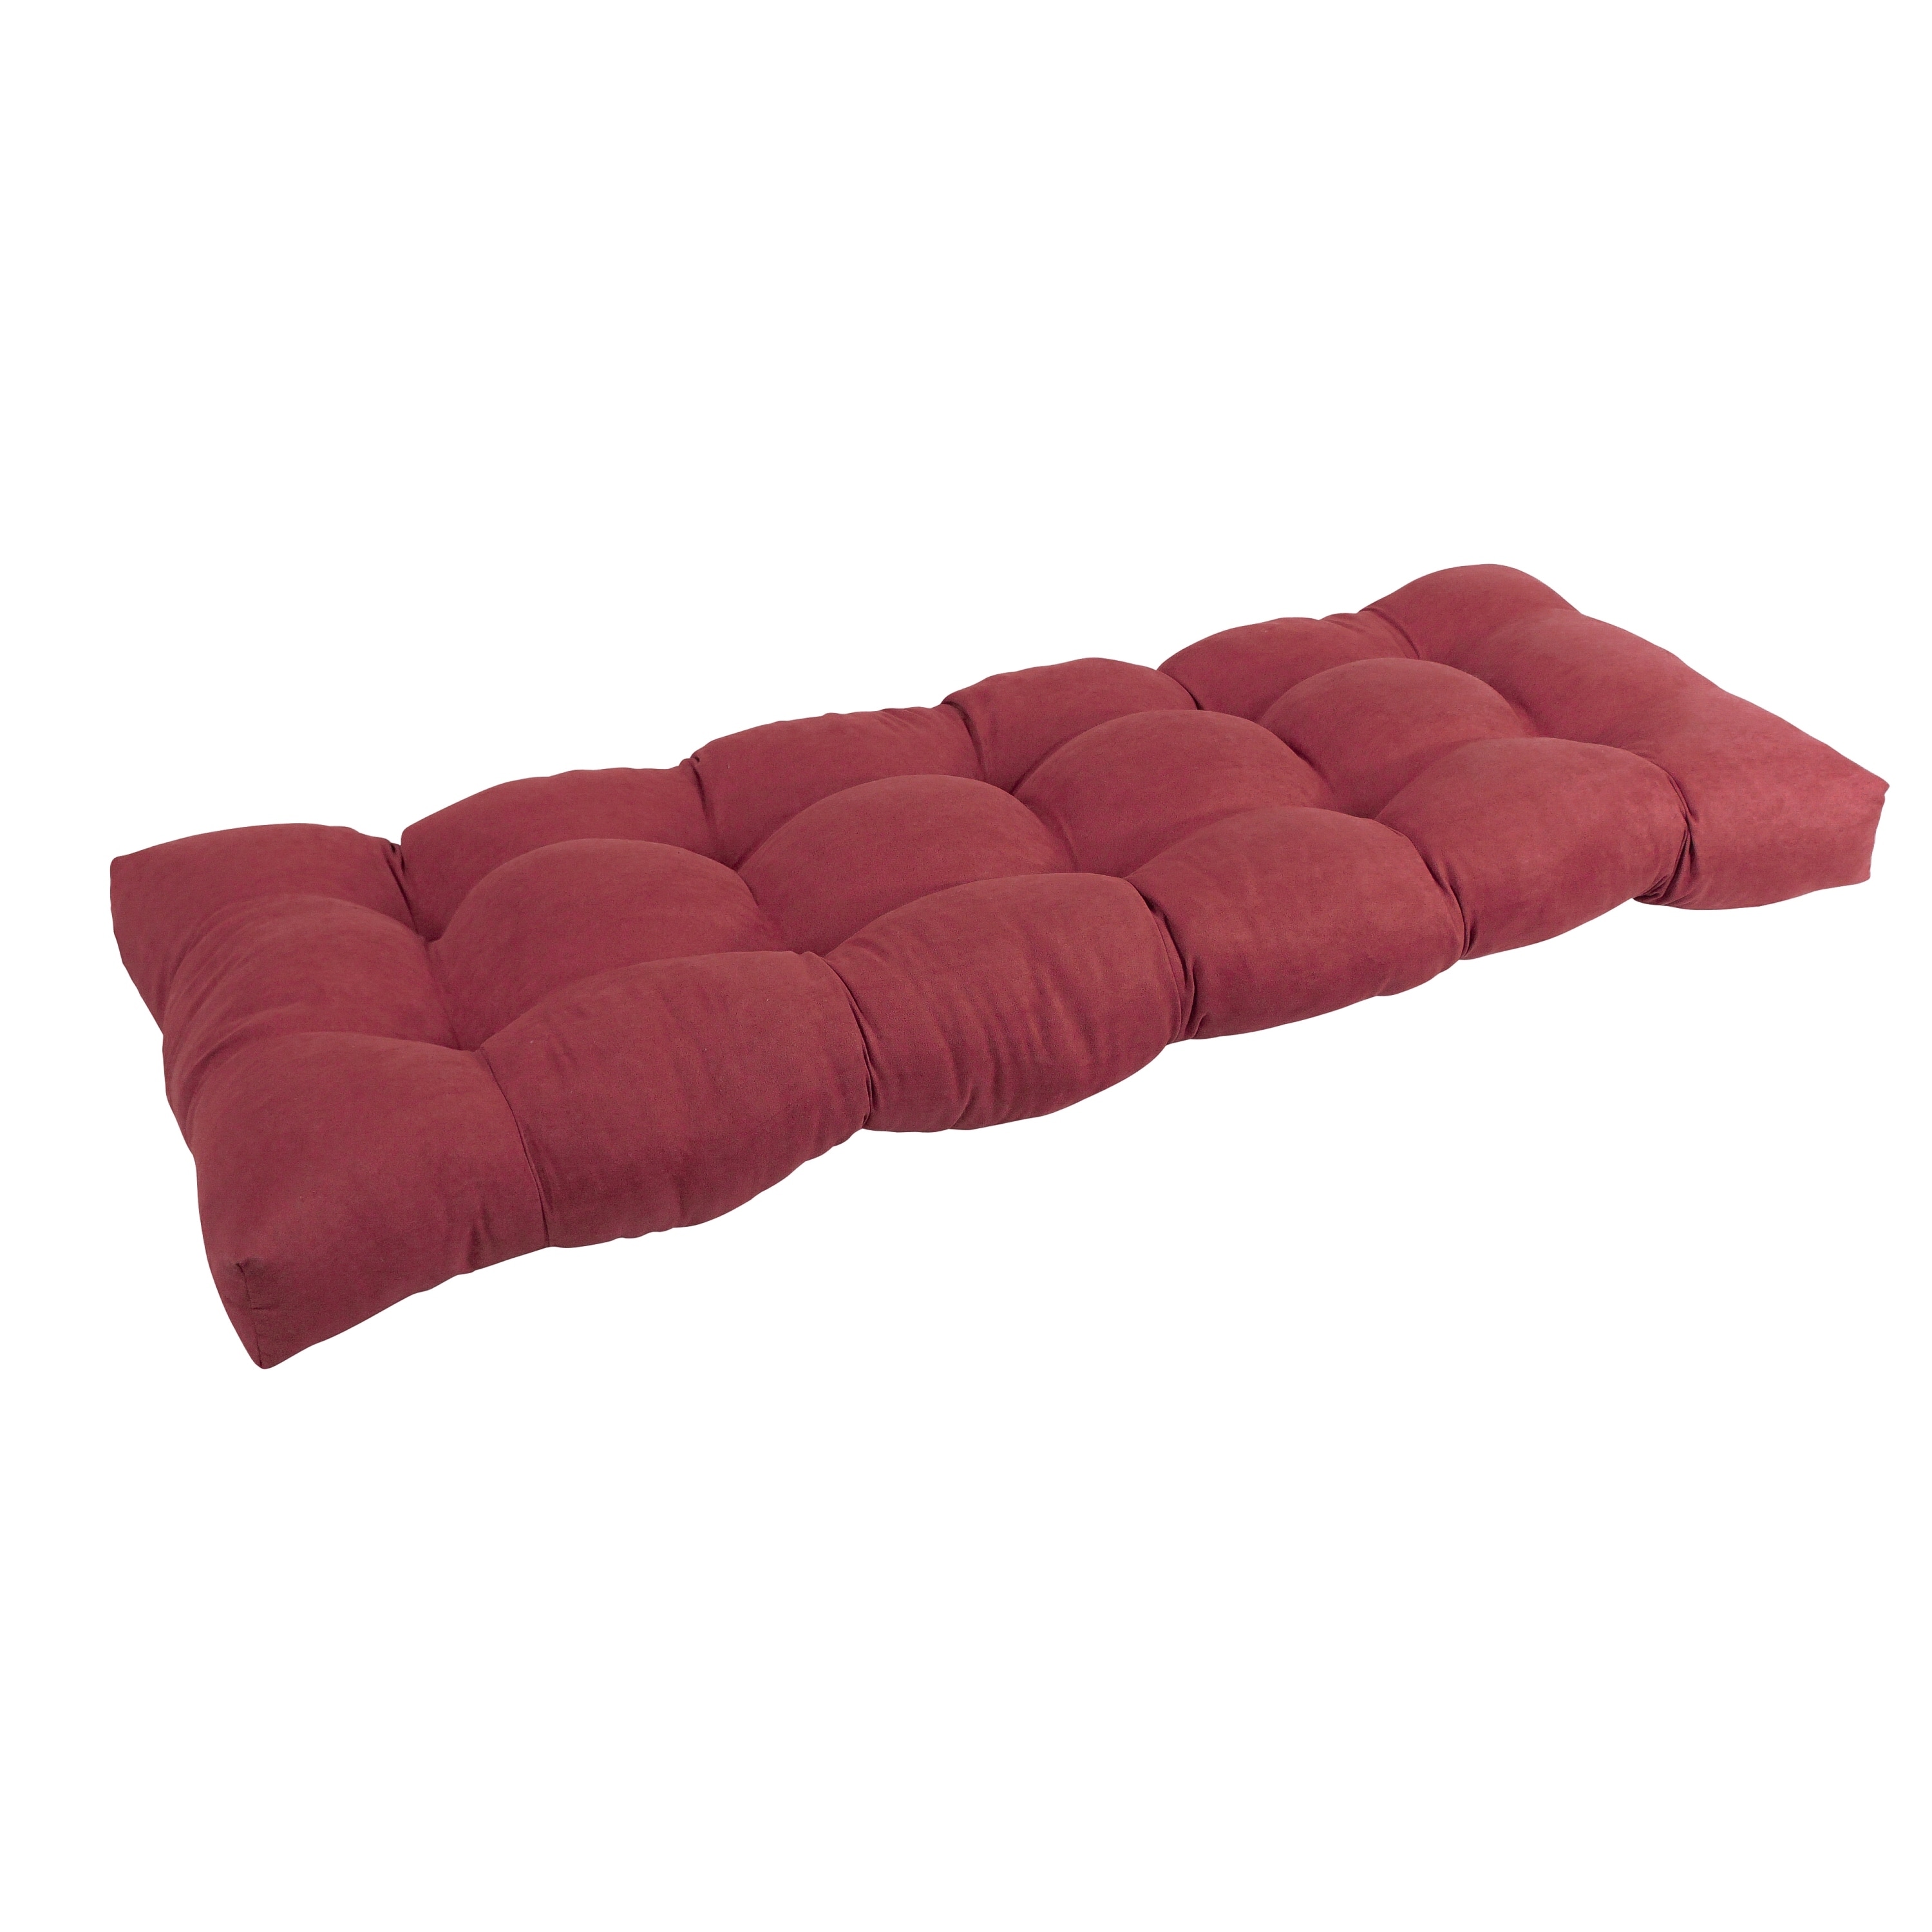 The Gripper Tufted 36 inch Universal Bench Cushion, Omega, Brown